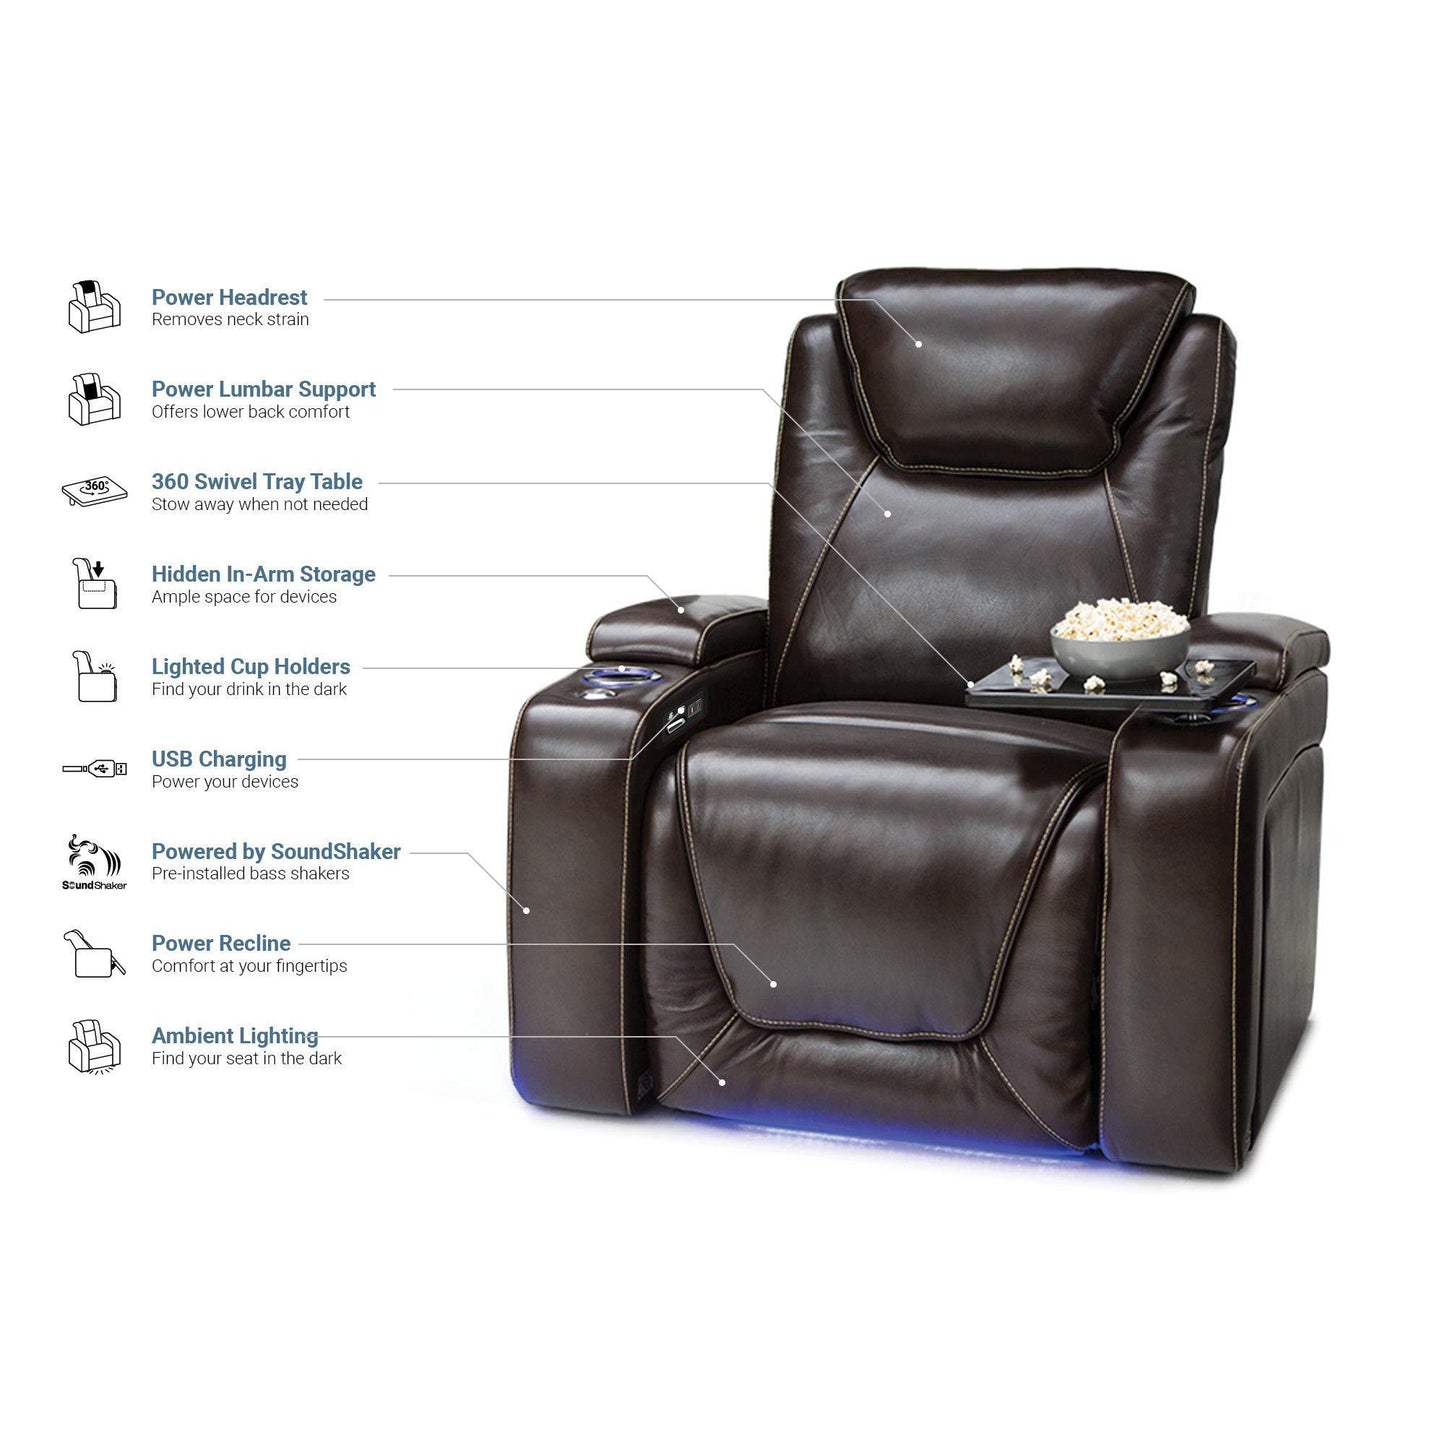 Storage seatcraft equinox home theater seating leather power recliner adjustable power headrest adjustable powered lumbar support usb charging storage soundshaker lighted cup holders brown